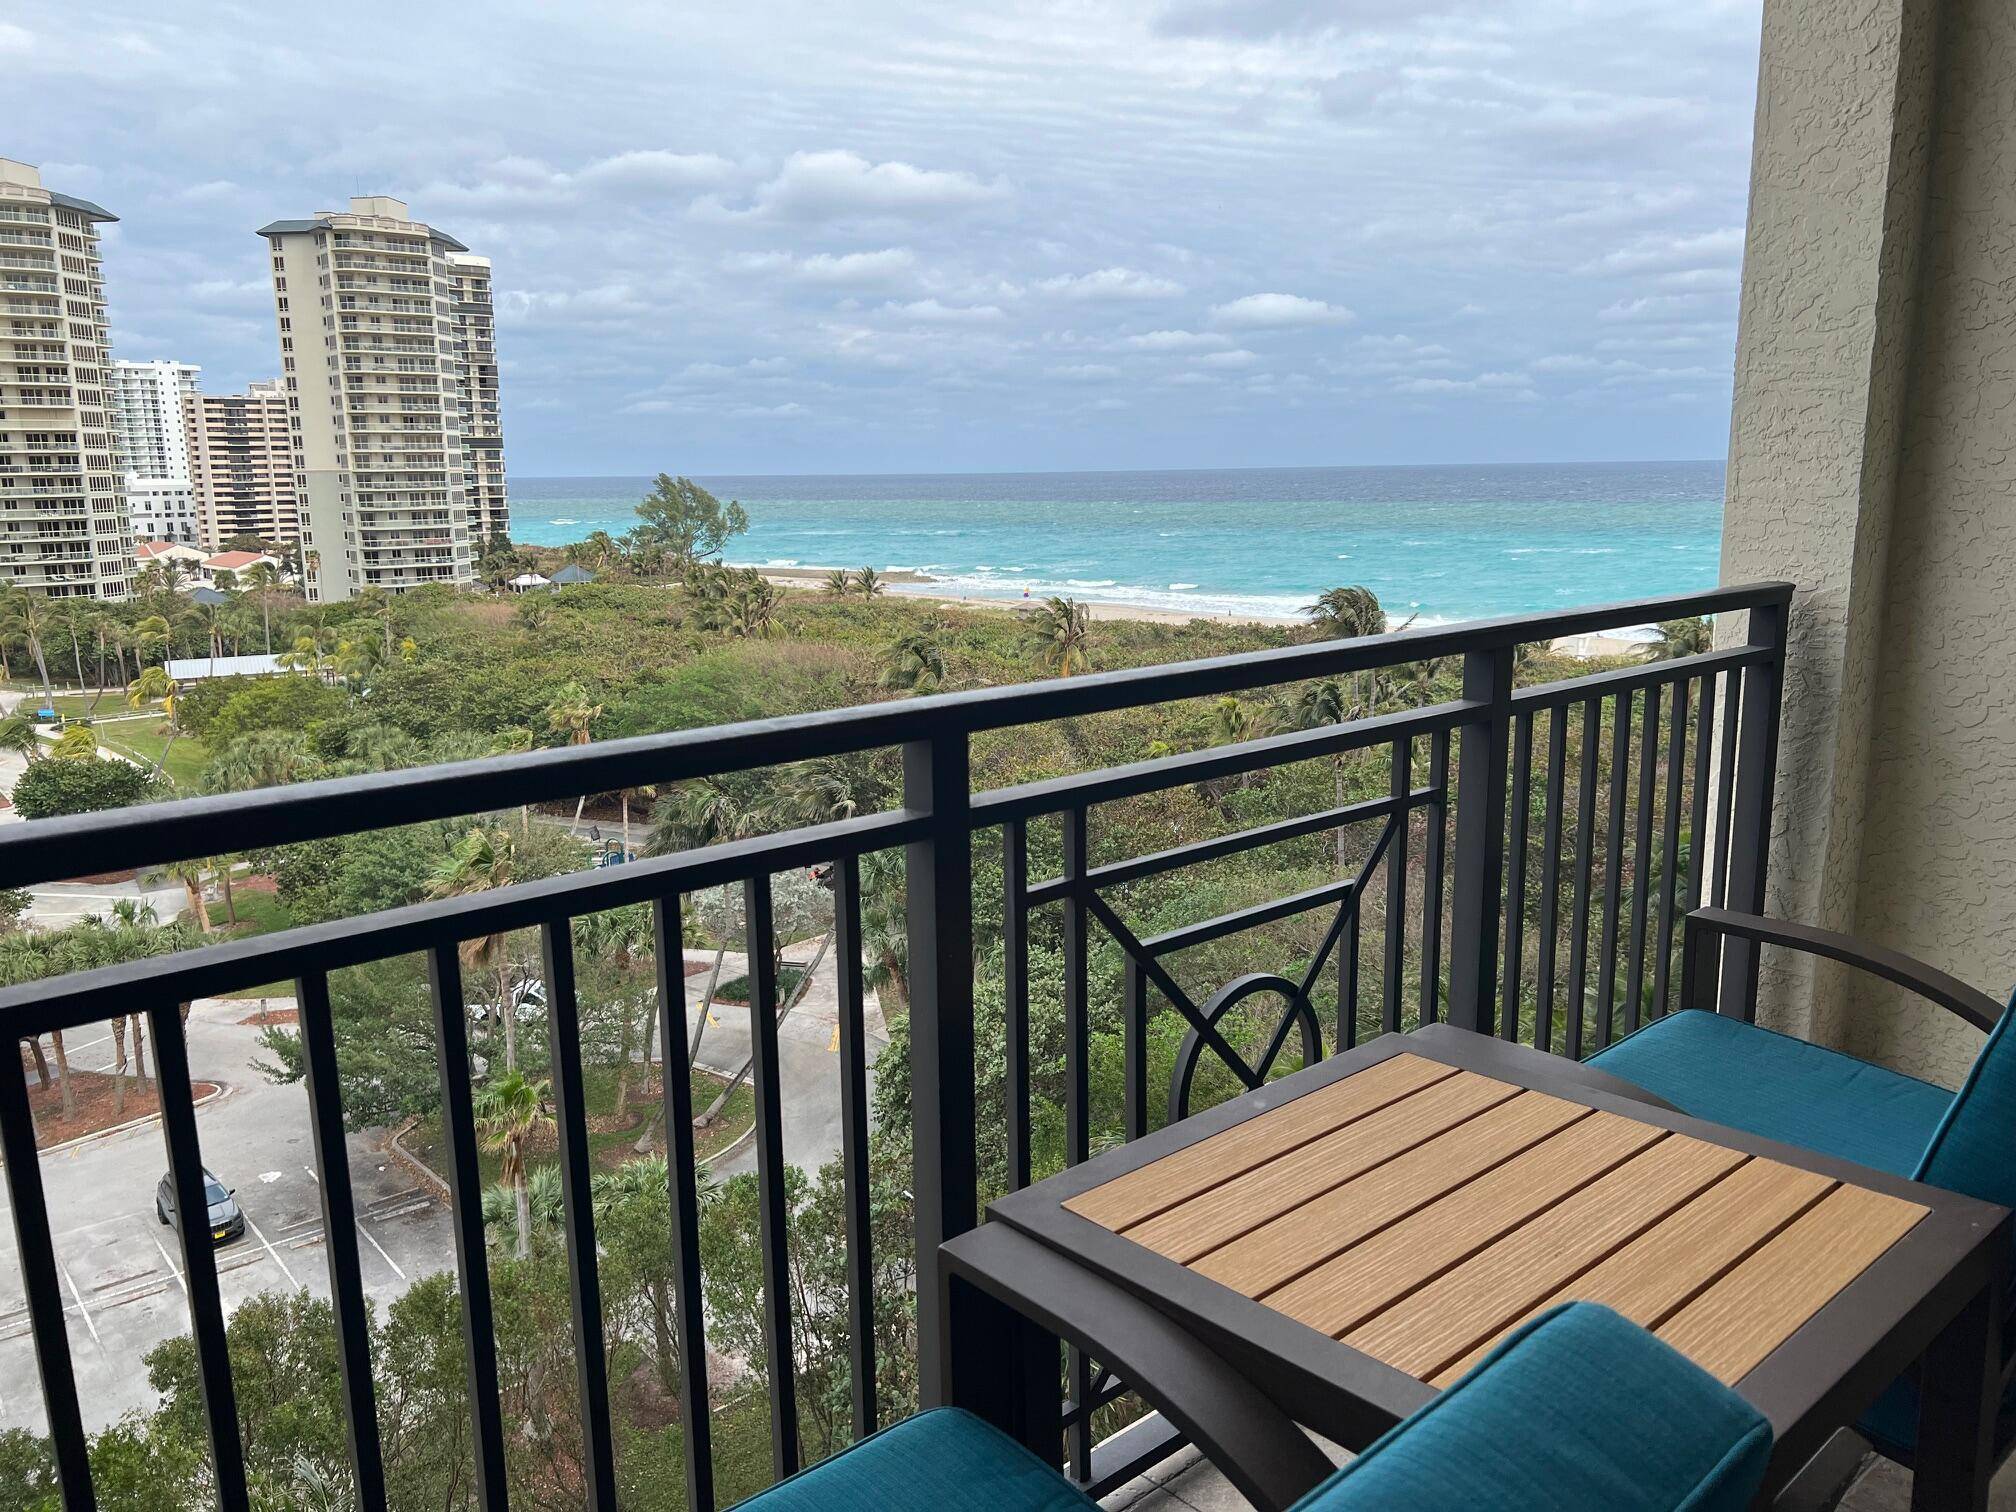 Indulge in the epitome of coastal living in this exquisite 1 BR Ocean View condo.